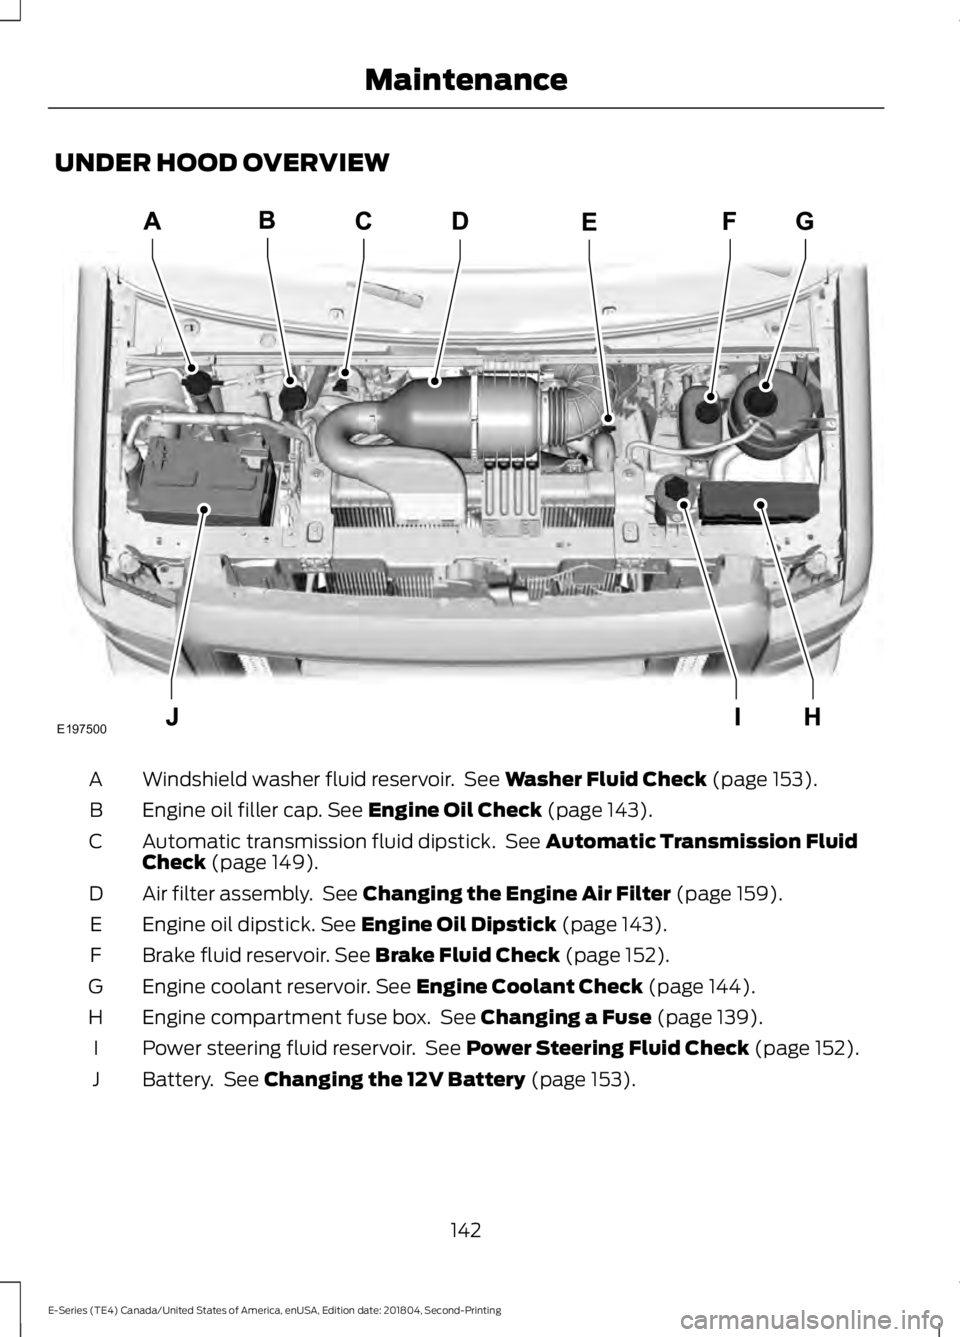 FORD E SERIES 2019  Owners Manual UNDER HOOD OVERVIEW
Windshield washer fluid reservoir.  See Washer Fluid Check (page 153).A
Engine oil filler cap. See Engine Oil Check (page 143).B
Automatic transmission fluid dipstick.  See Automat